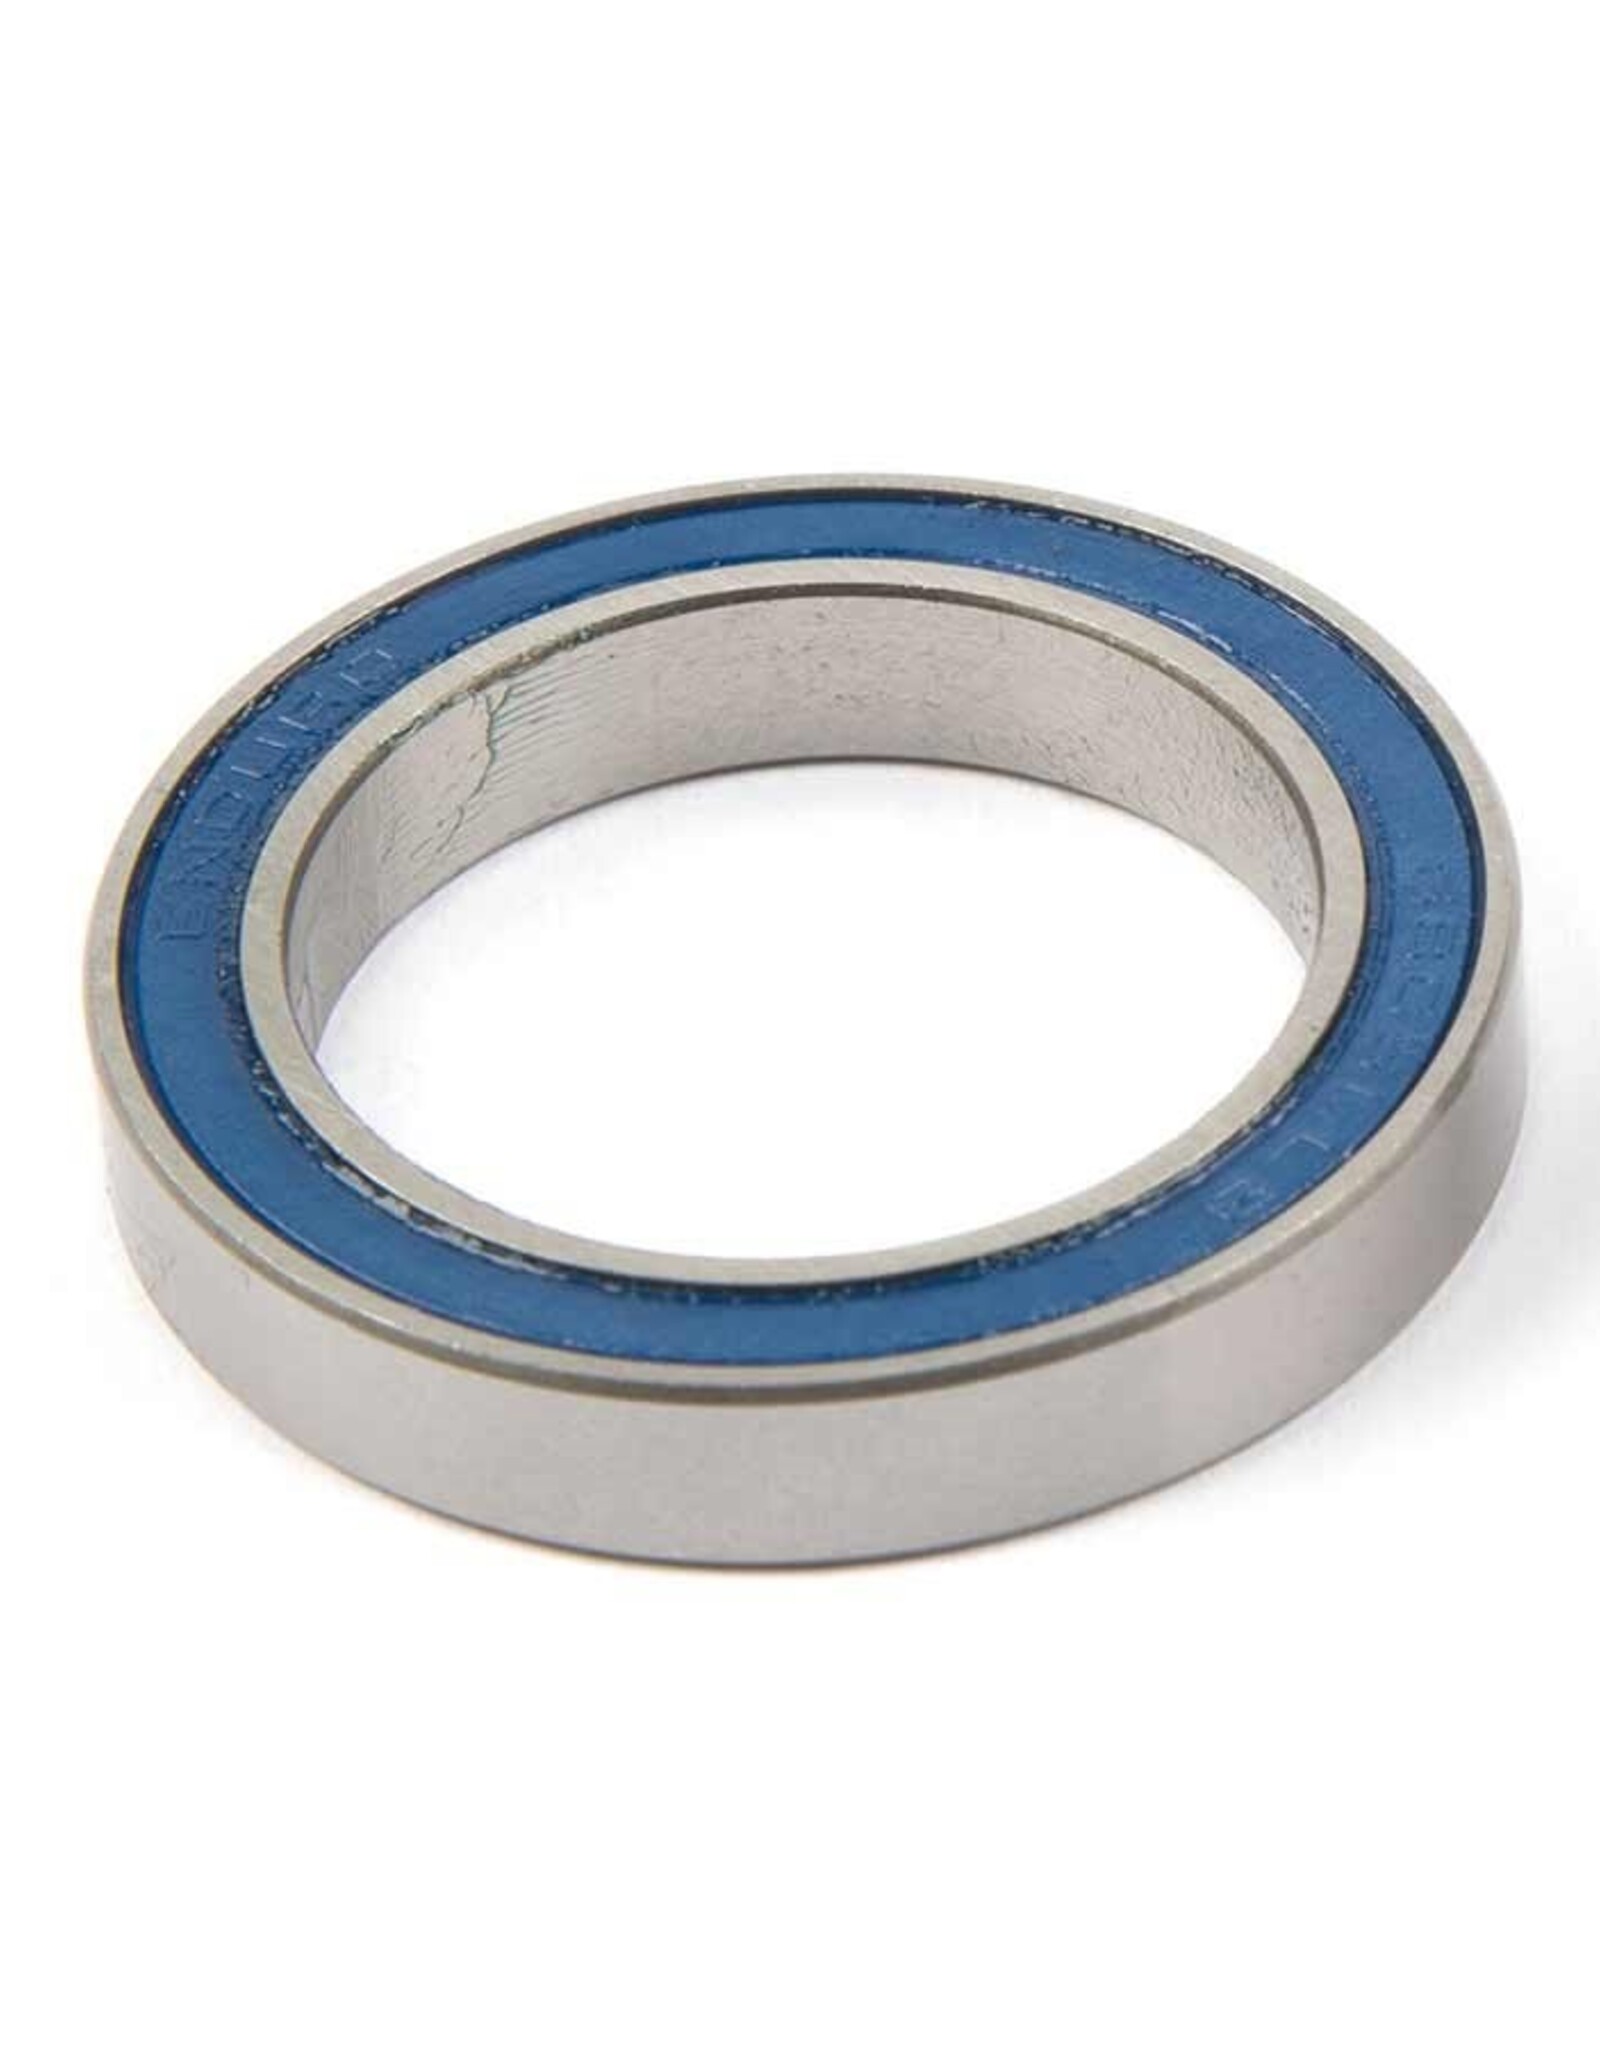 Enduro 6806 ABEC-3 Steel Bearing /each  (30mm x 42mm x 7mm - for 30mm spindle)